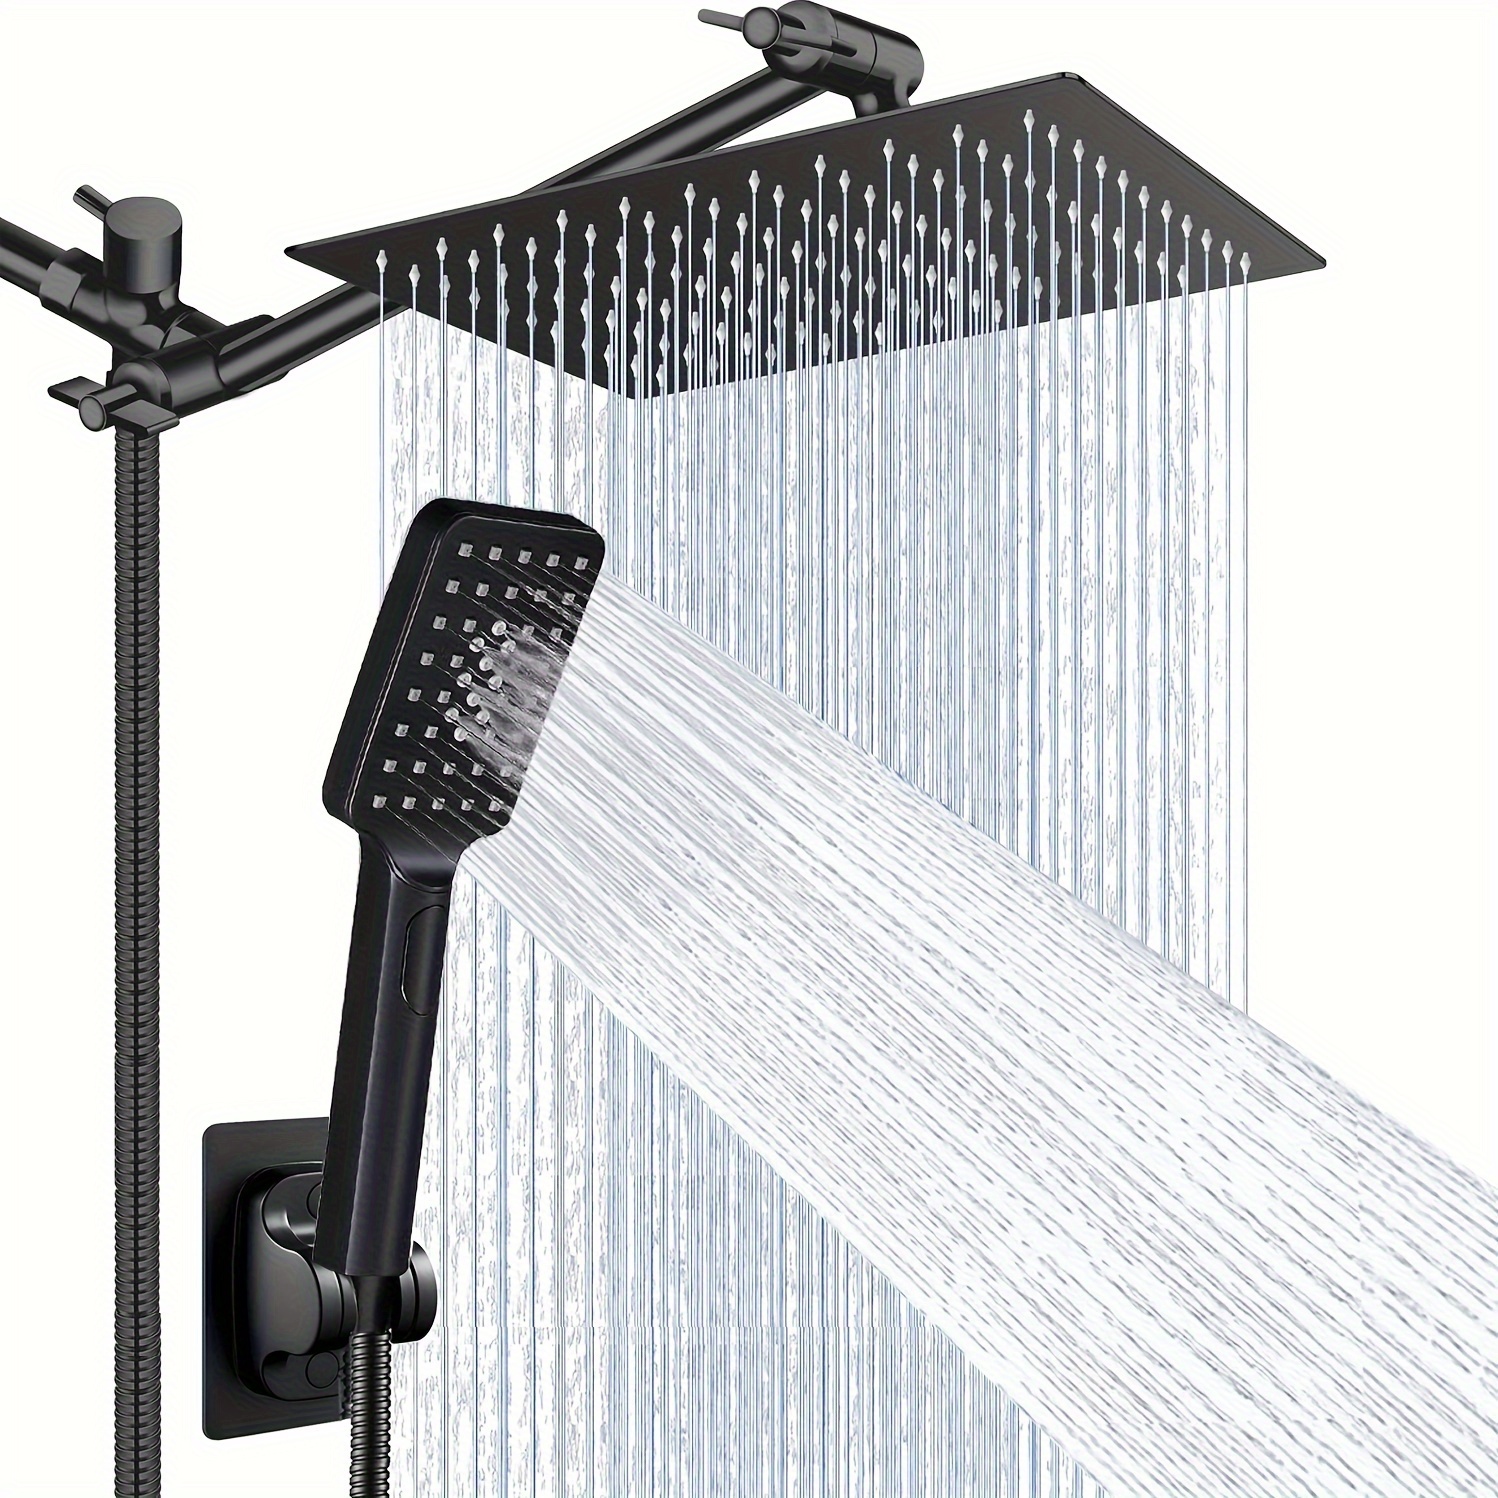 

Shower Head Combo, 10 Inch High Pressure Rain Shower Head With 9 Inch Adjustable Extension Arm And 3 Settings Handheld, Powerful Shower Spray Against Low Pressure Water With Long 78 Inch Hose